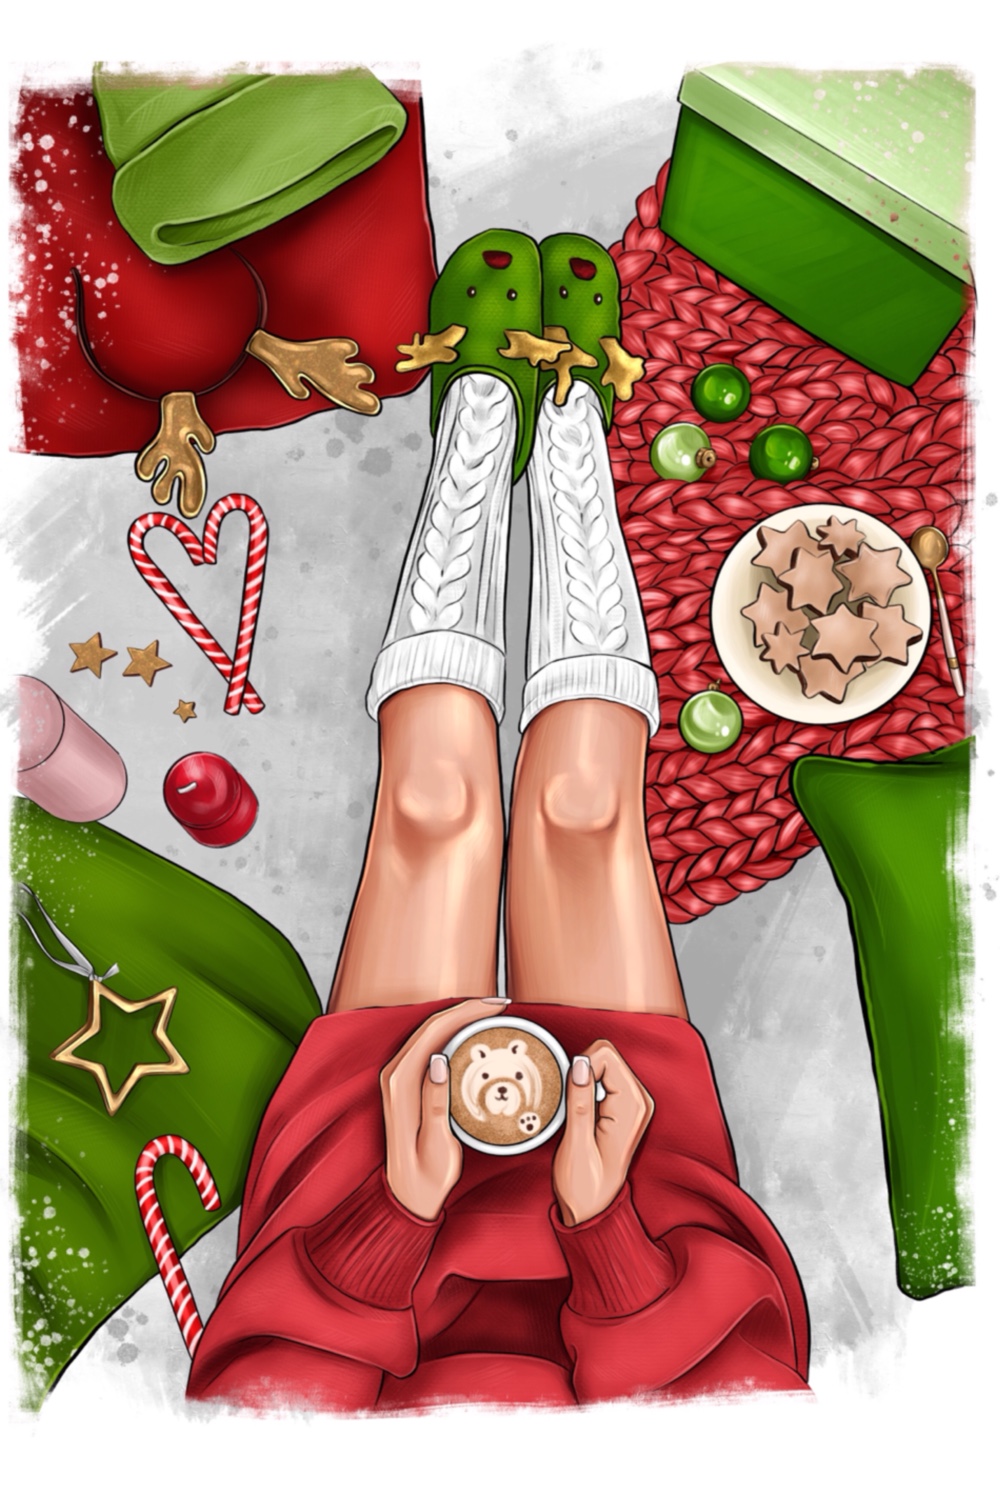 Christmas And Happy New Year Clipart Pinterest Image.